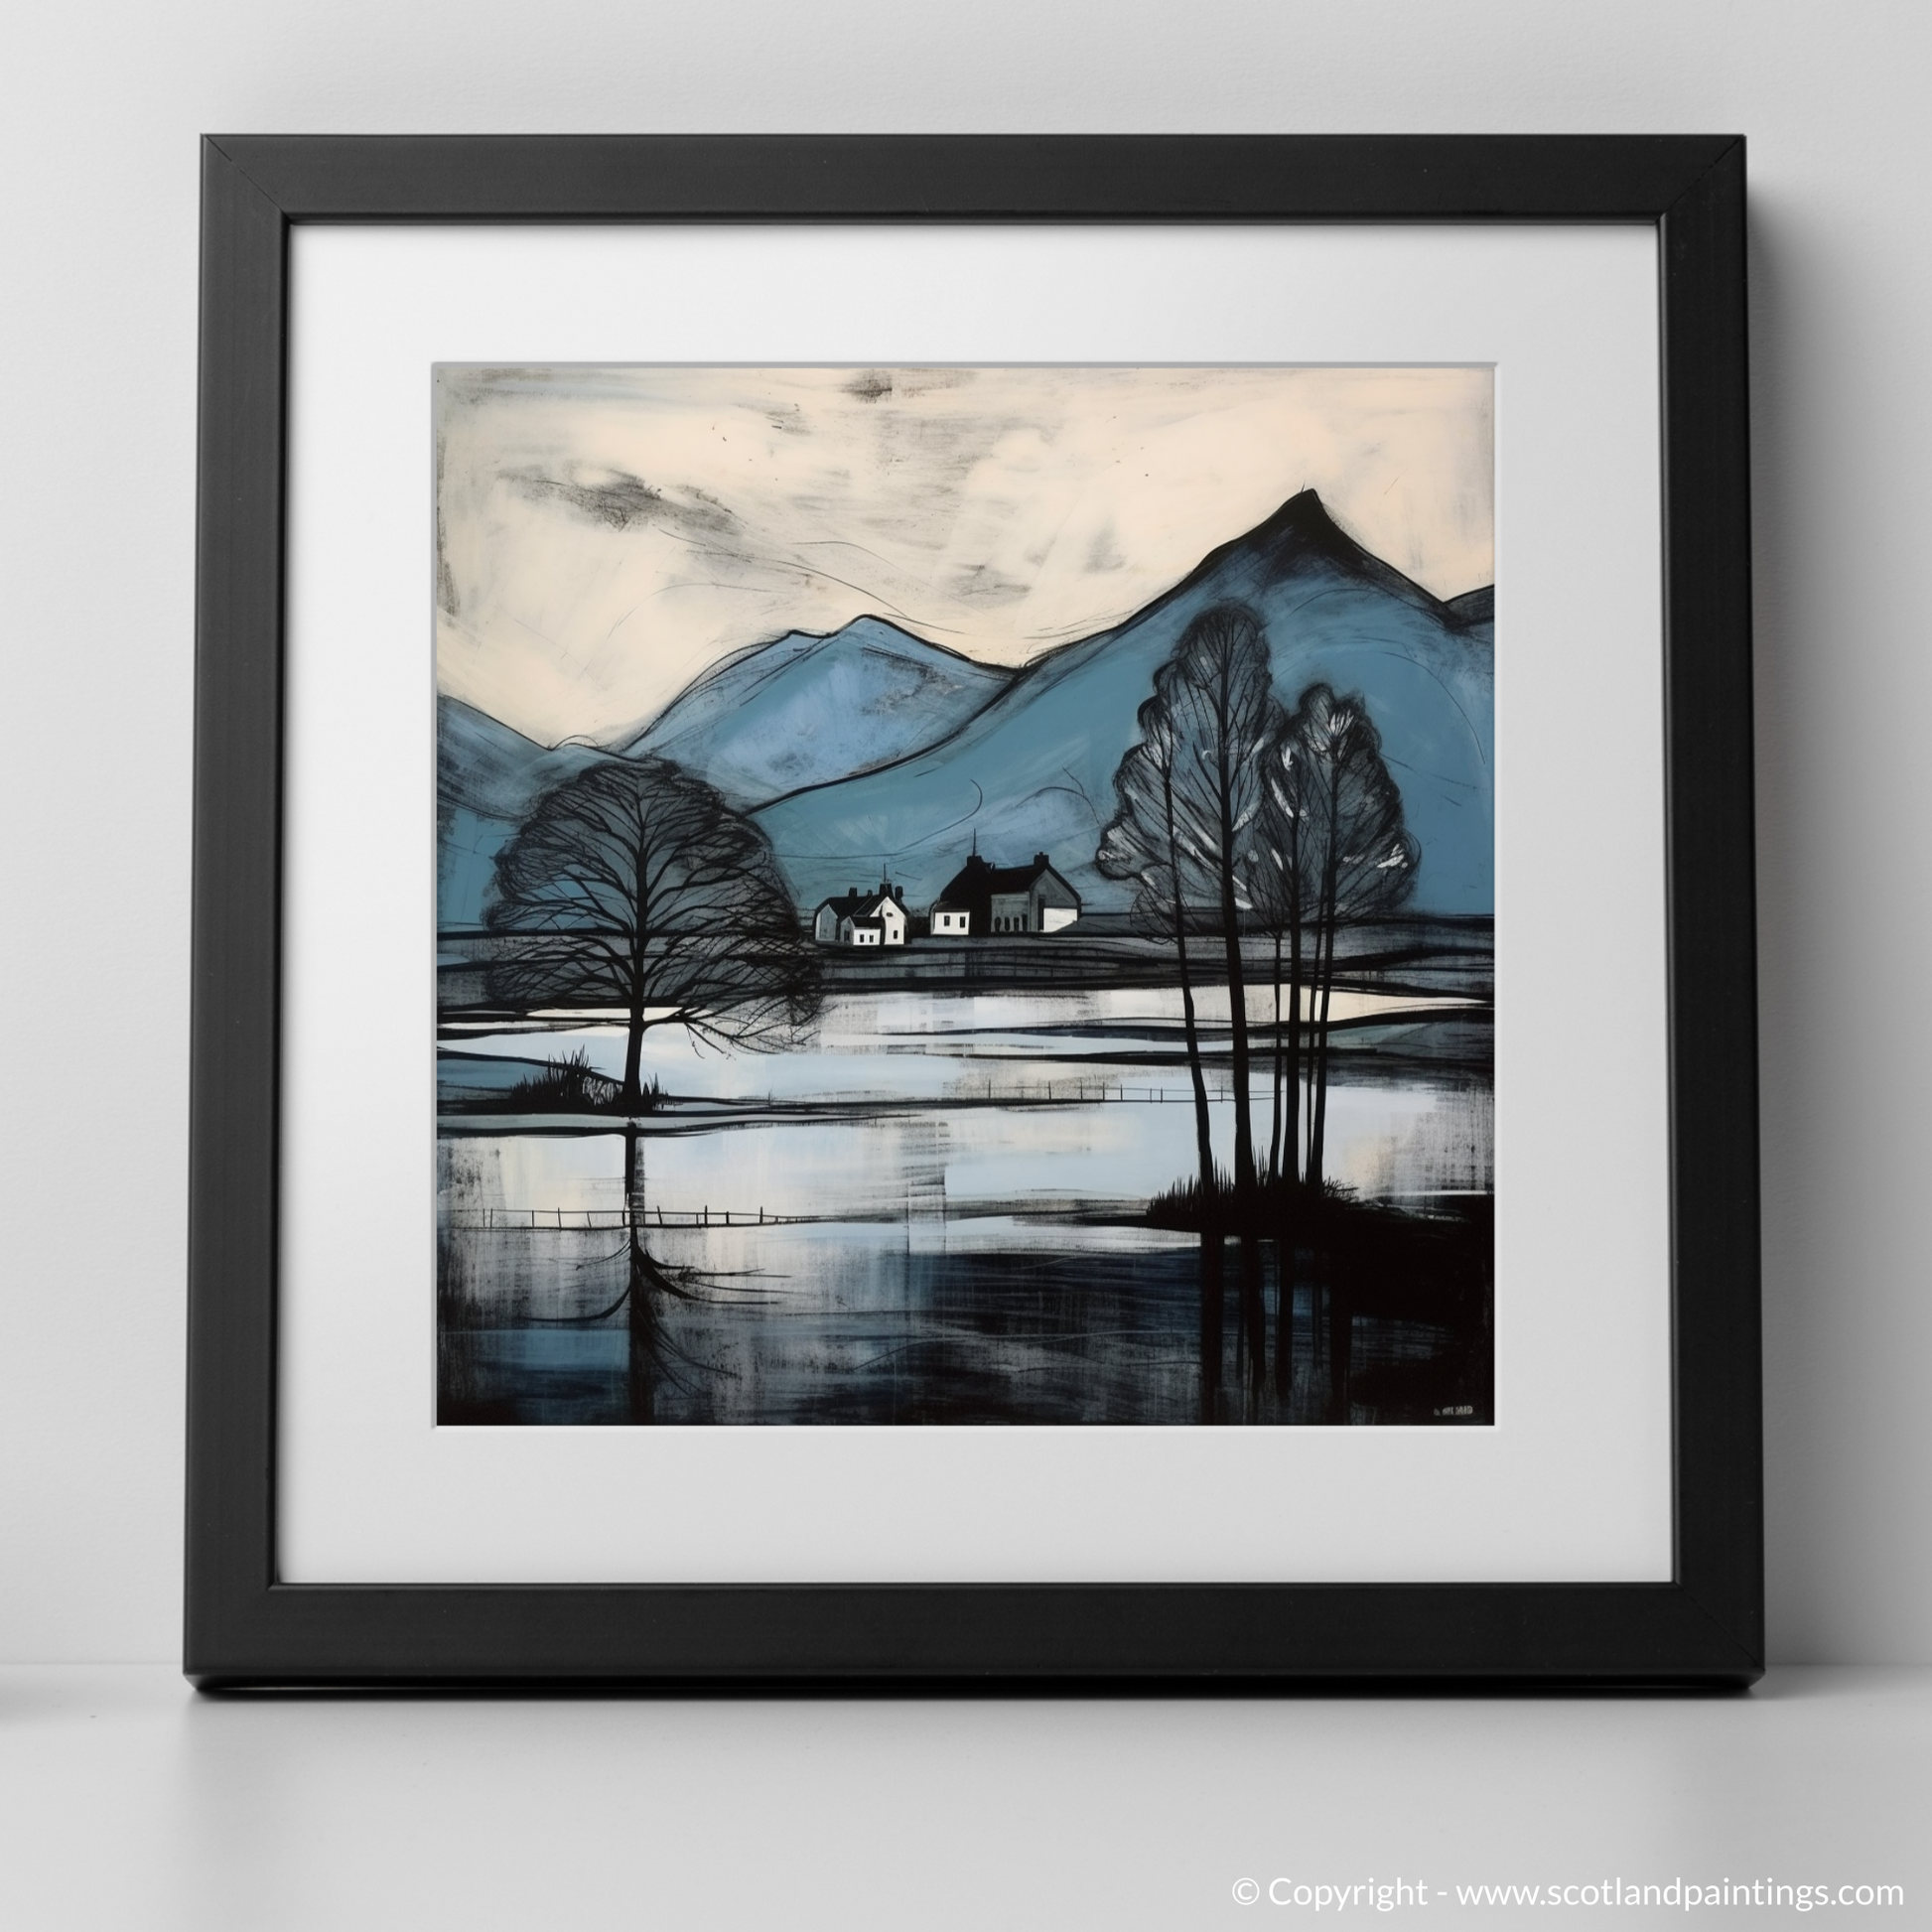 Art Print of Loch Awe, Argyll and Bute with a black frame